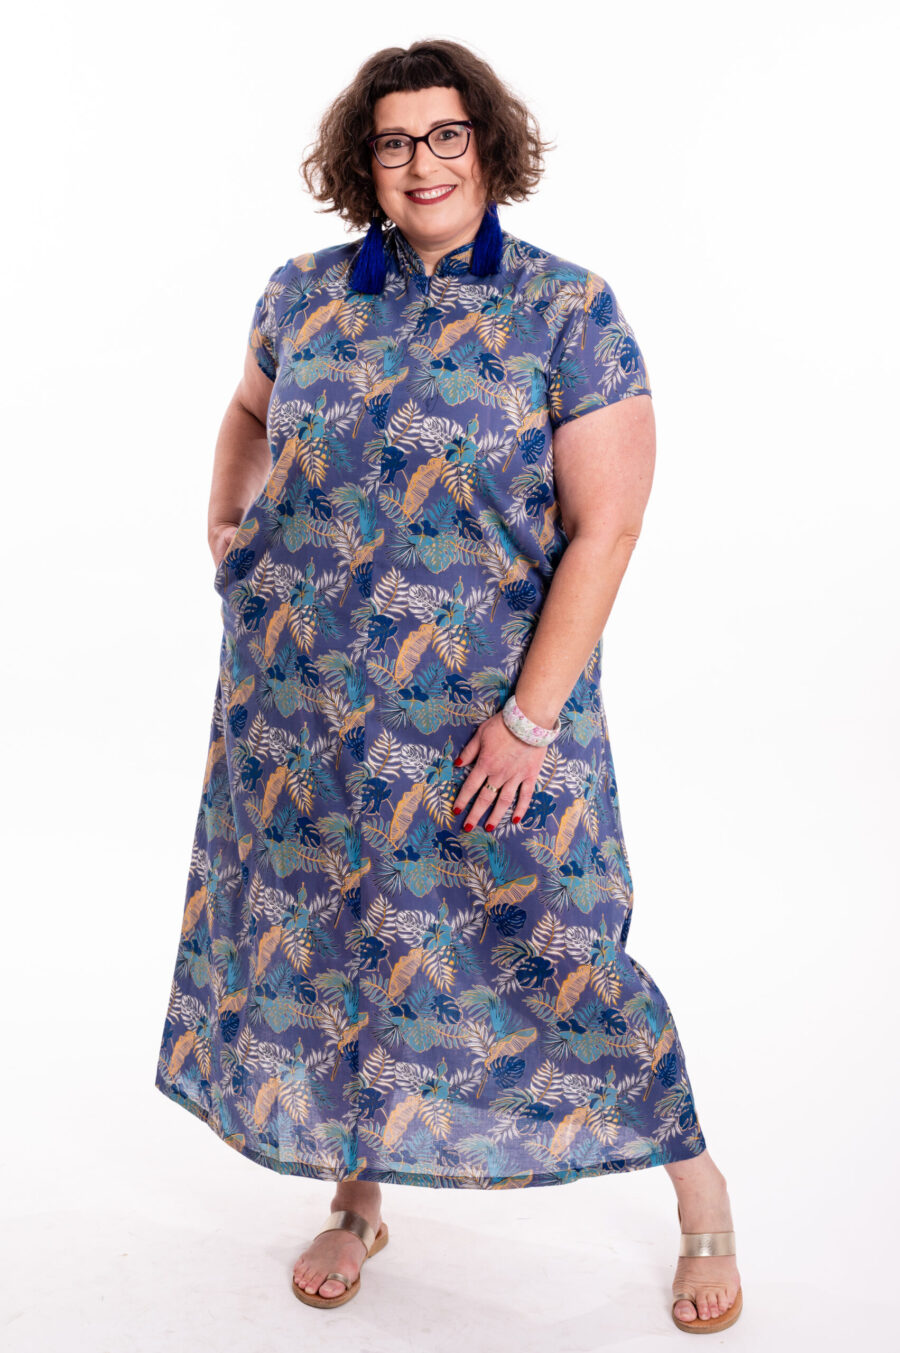 Maiko dress | Japanese dress with a unique high collar - Golden blue print, golden decorated leaves on a blue background